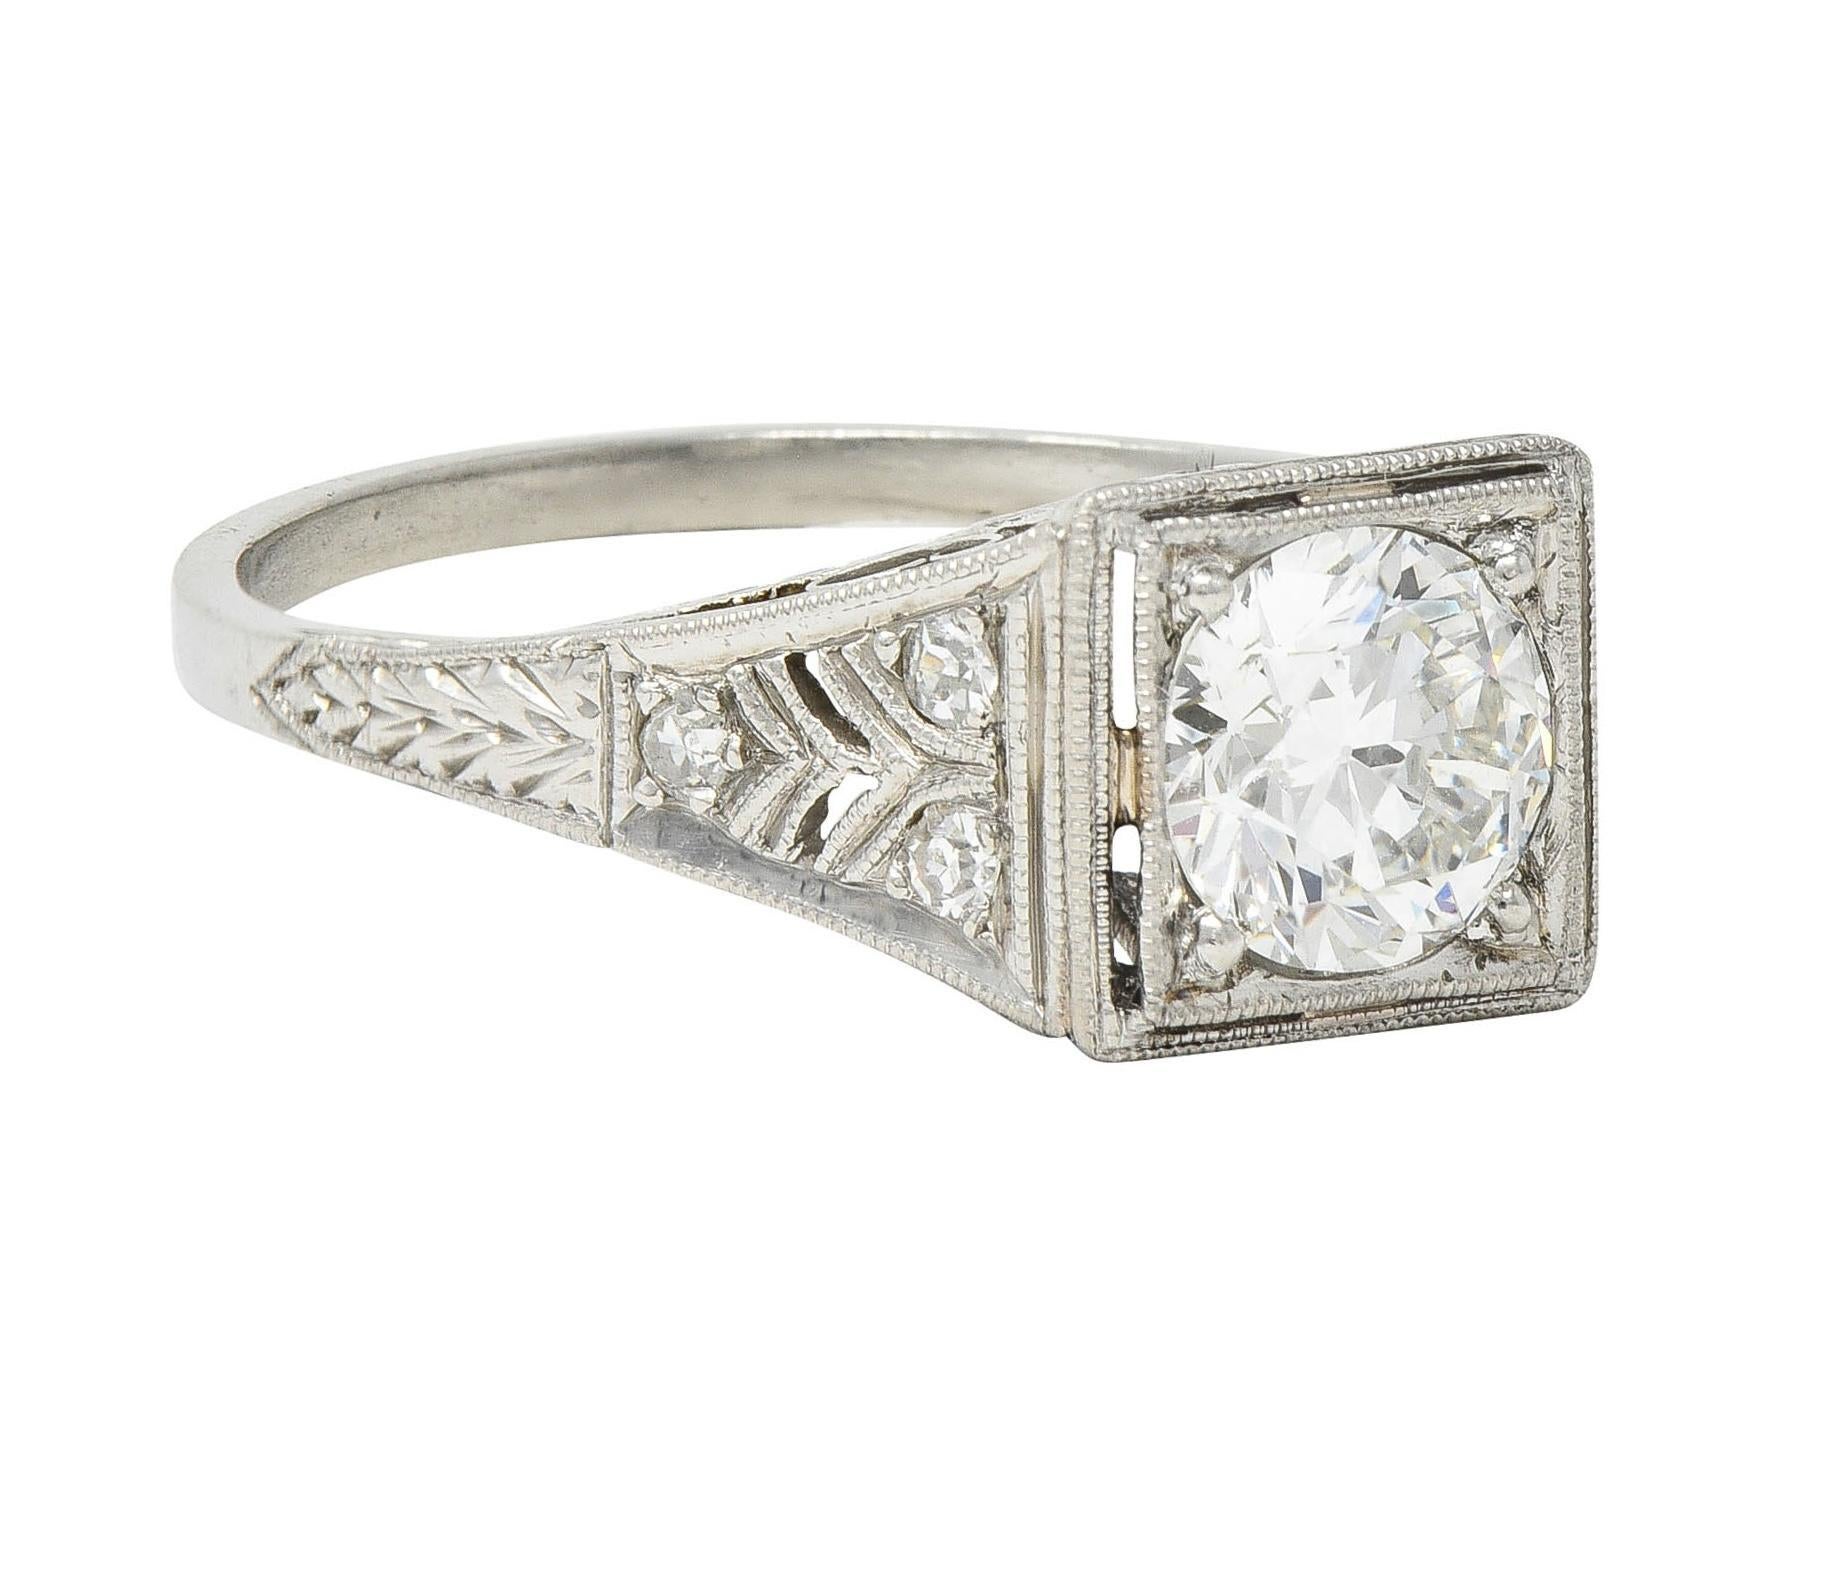 Centering an old European cut diamond weighing in approximately 1.02 carat - I color and VS clarity
Bead set in a square form with a pierced milgrain detail surround 
Featuring a pierced trellis and foliate motif filigree gallery
Flanked by bead set